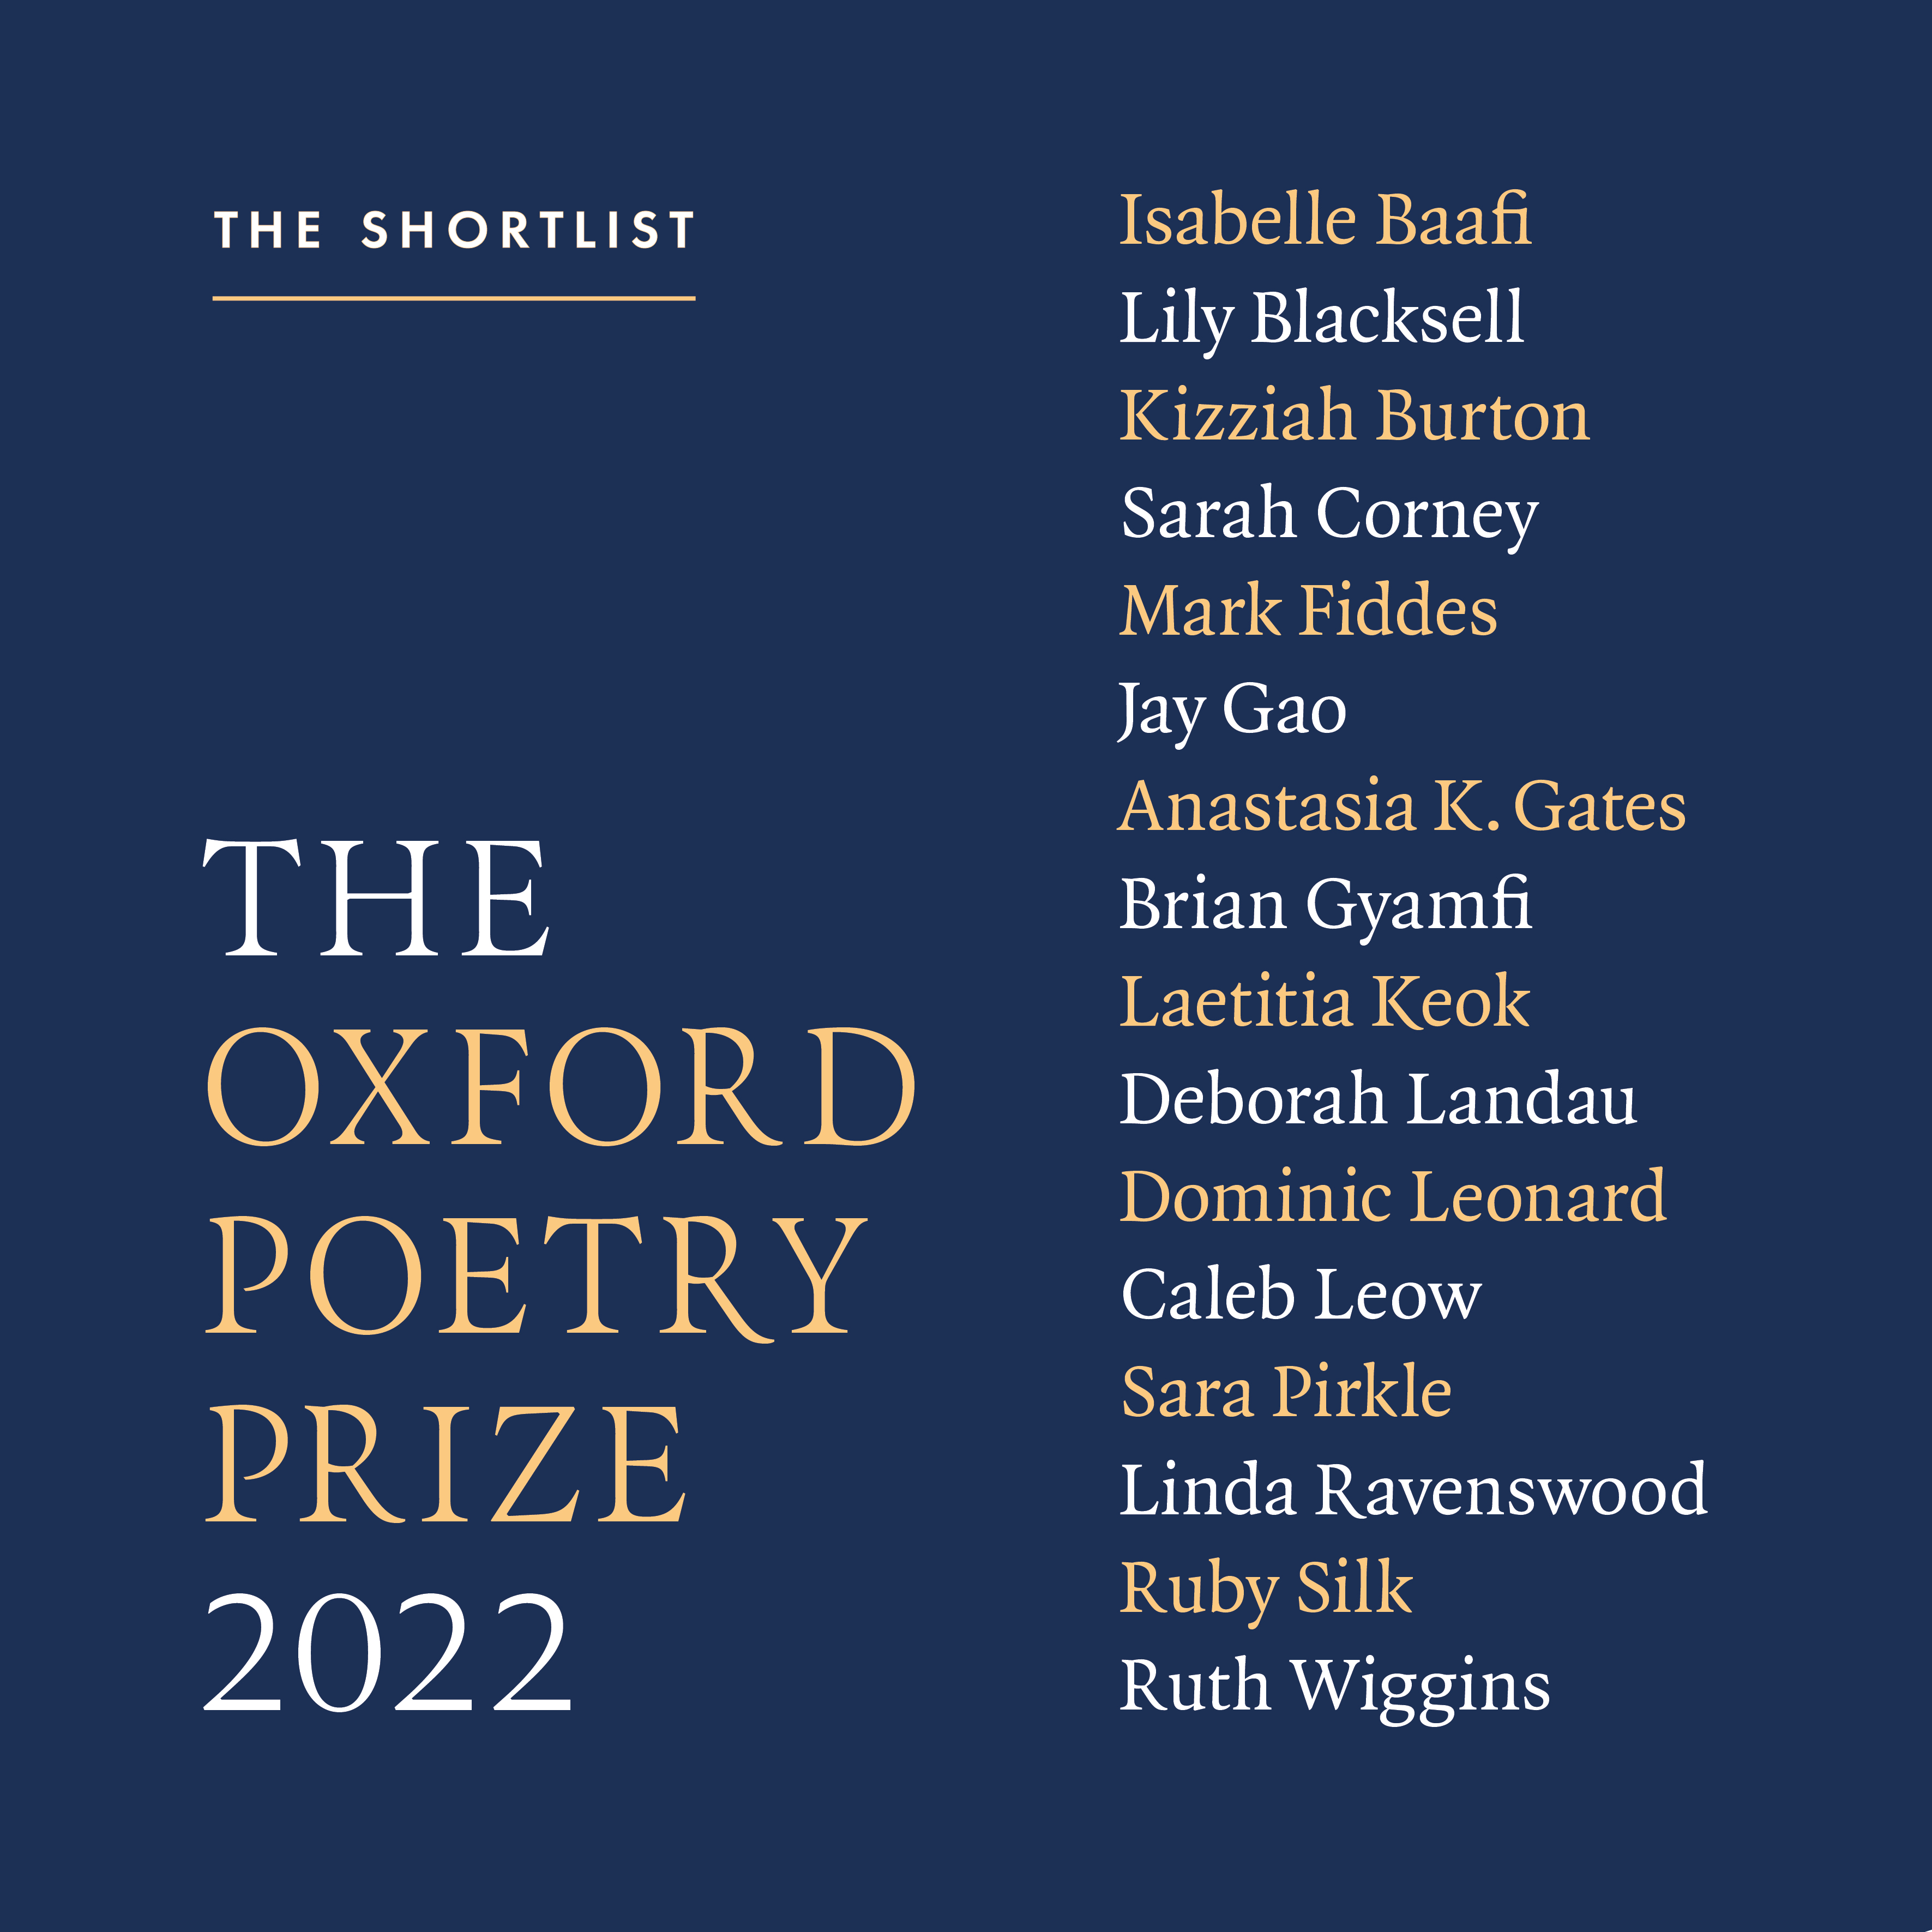 Oxford Poetry Prize 2022 Shortlist